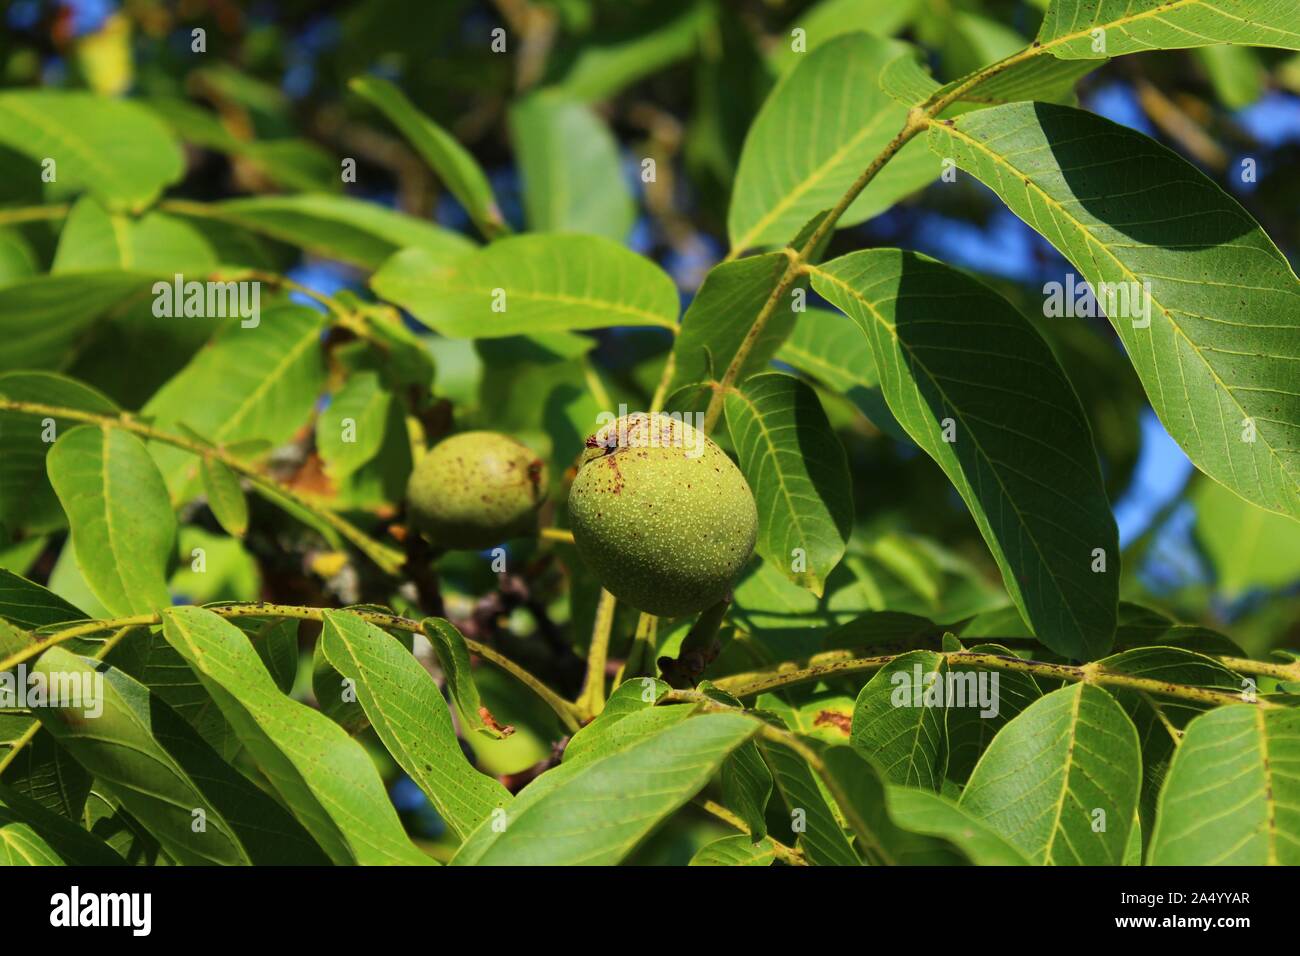 The picture shows walnuts on the walnut tree. Stock Photo